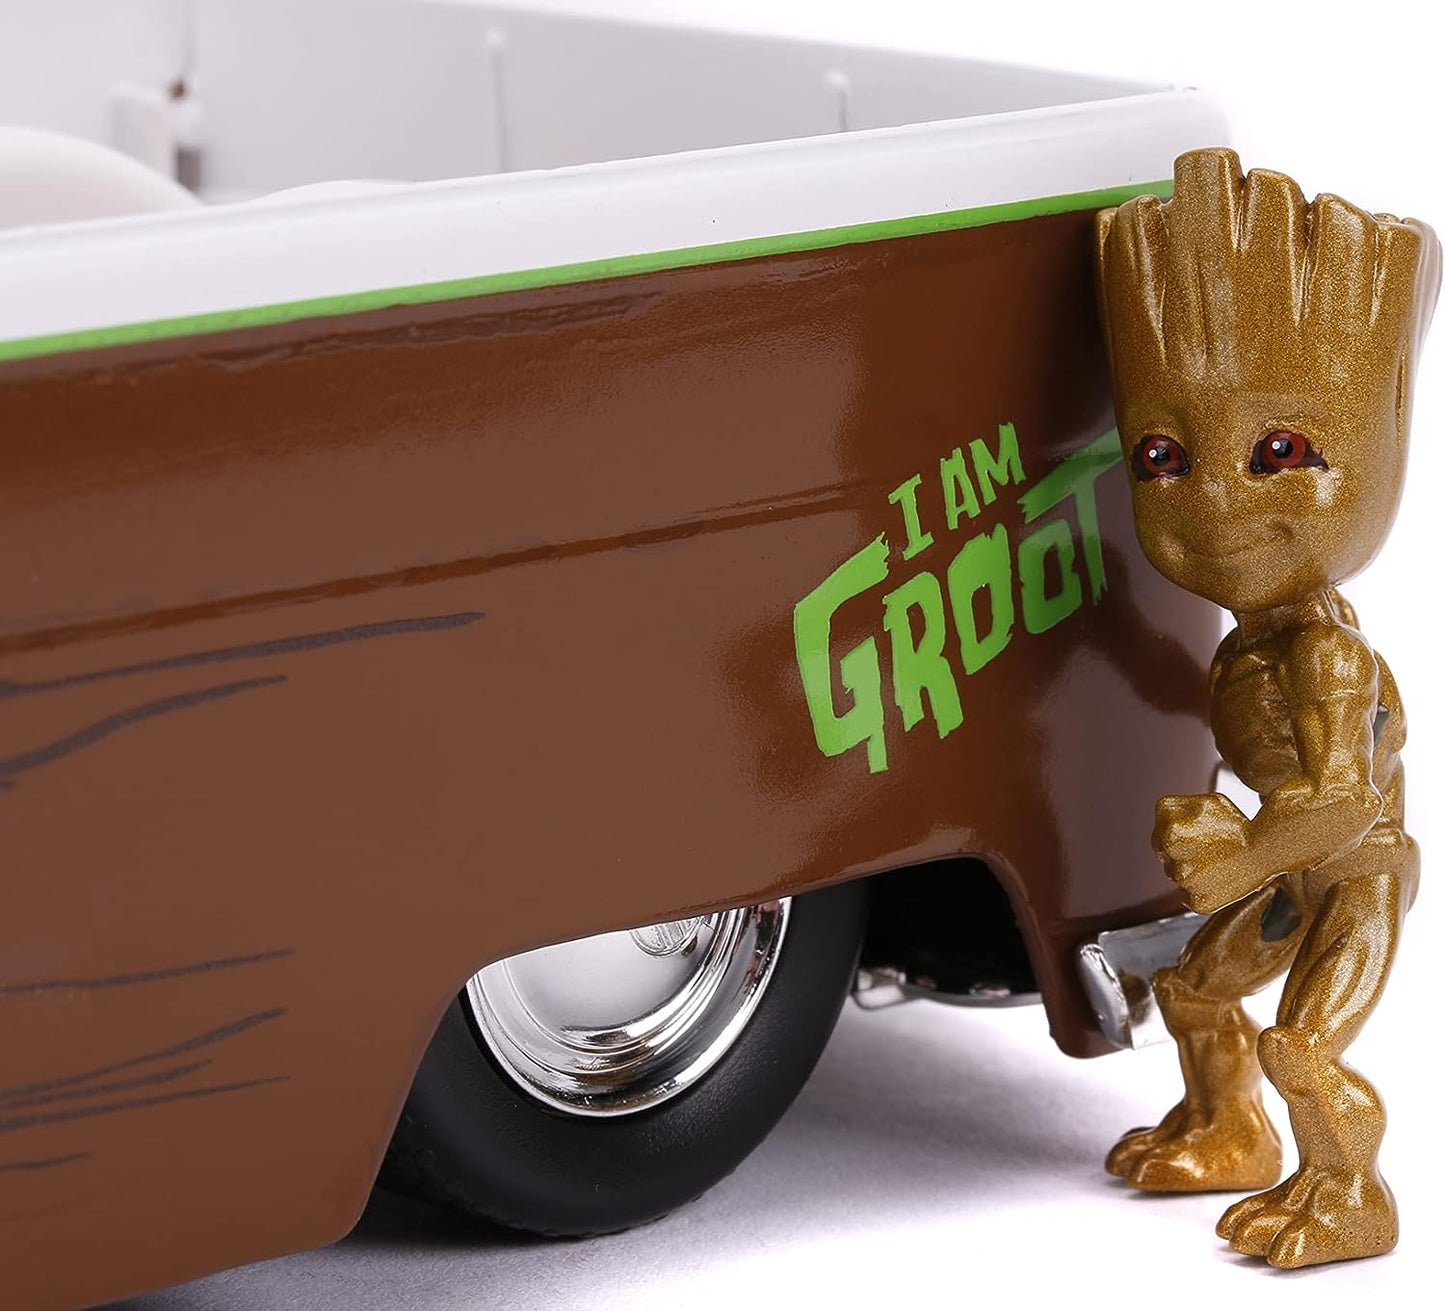 Marvel Guardians of The Galaxy 1:24 Volkswagen Bus Die-Cast Car & 2.75" Groot Figure, Toys for Kids and Adults